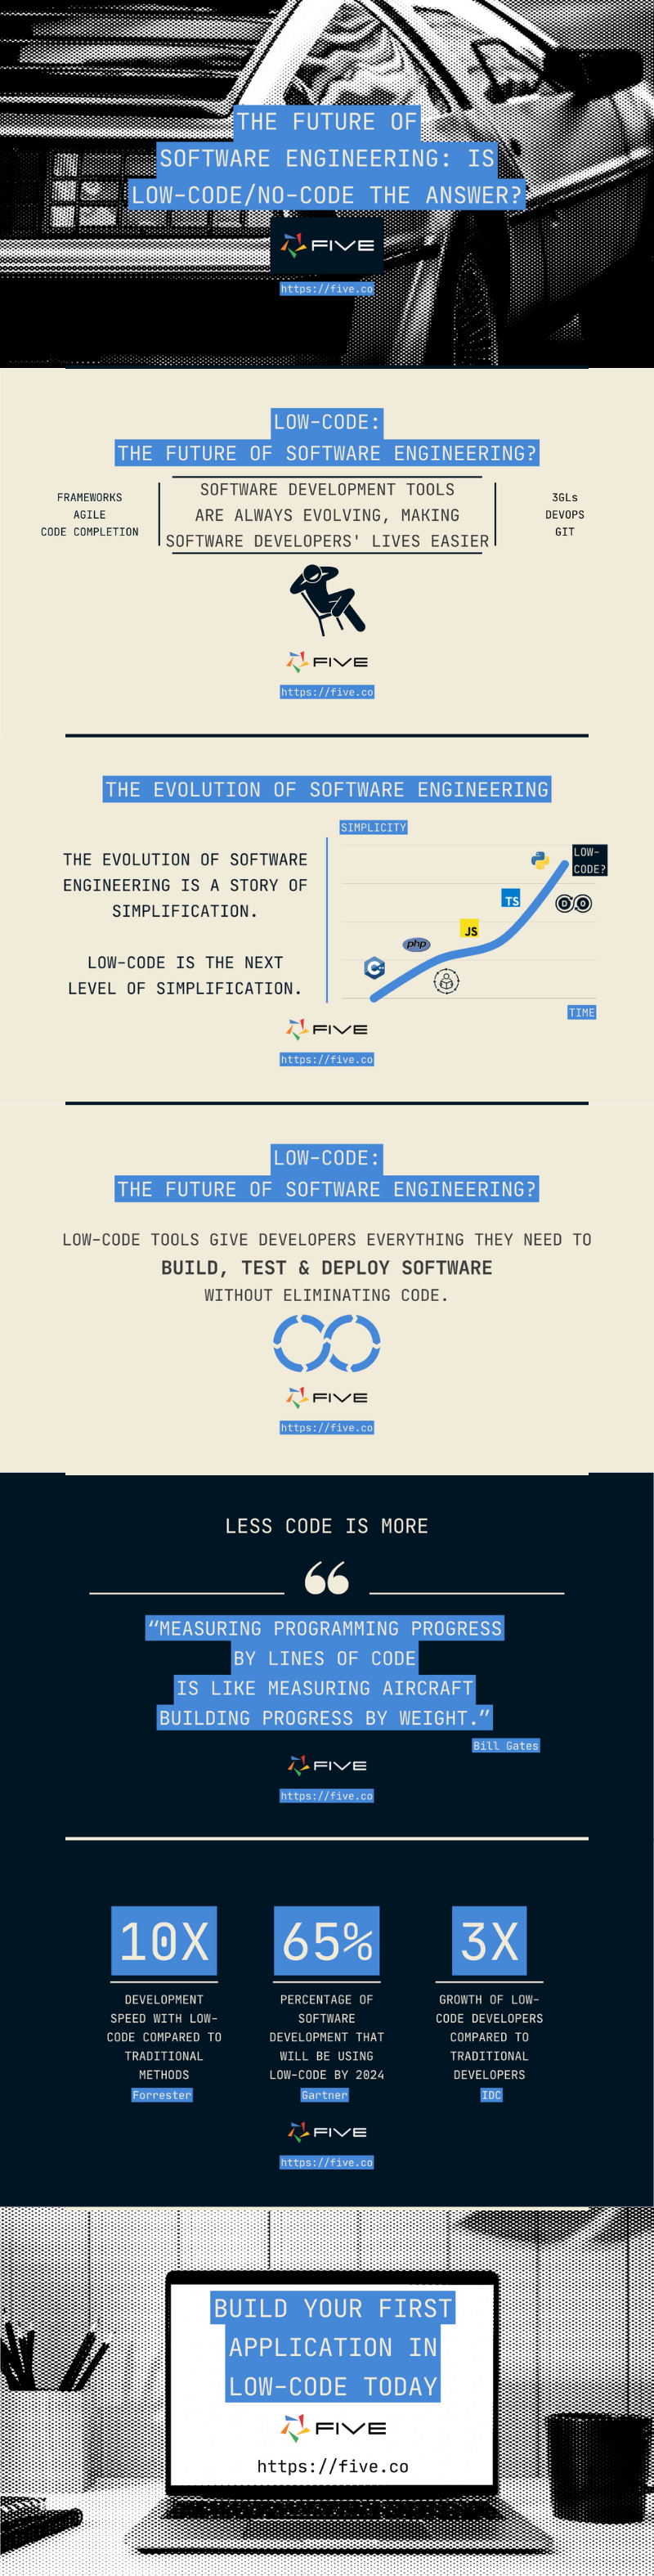 Five.Co - The Future Of Software Engineering Is Low-Code The Answer Infographic